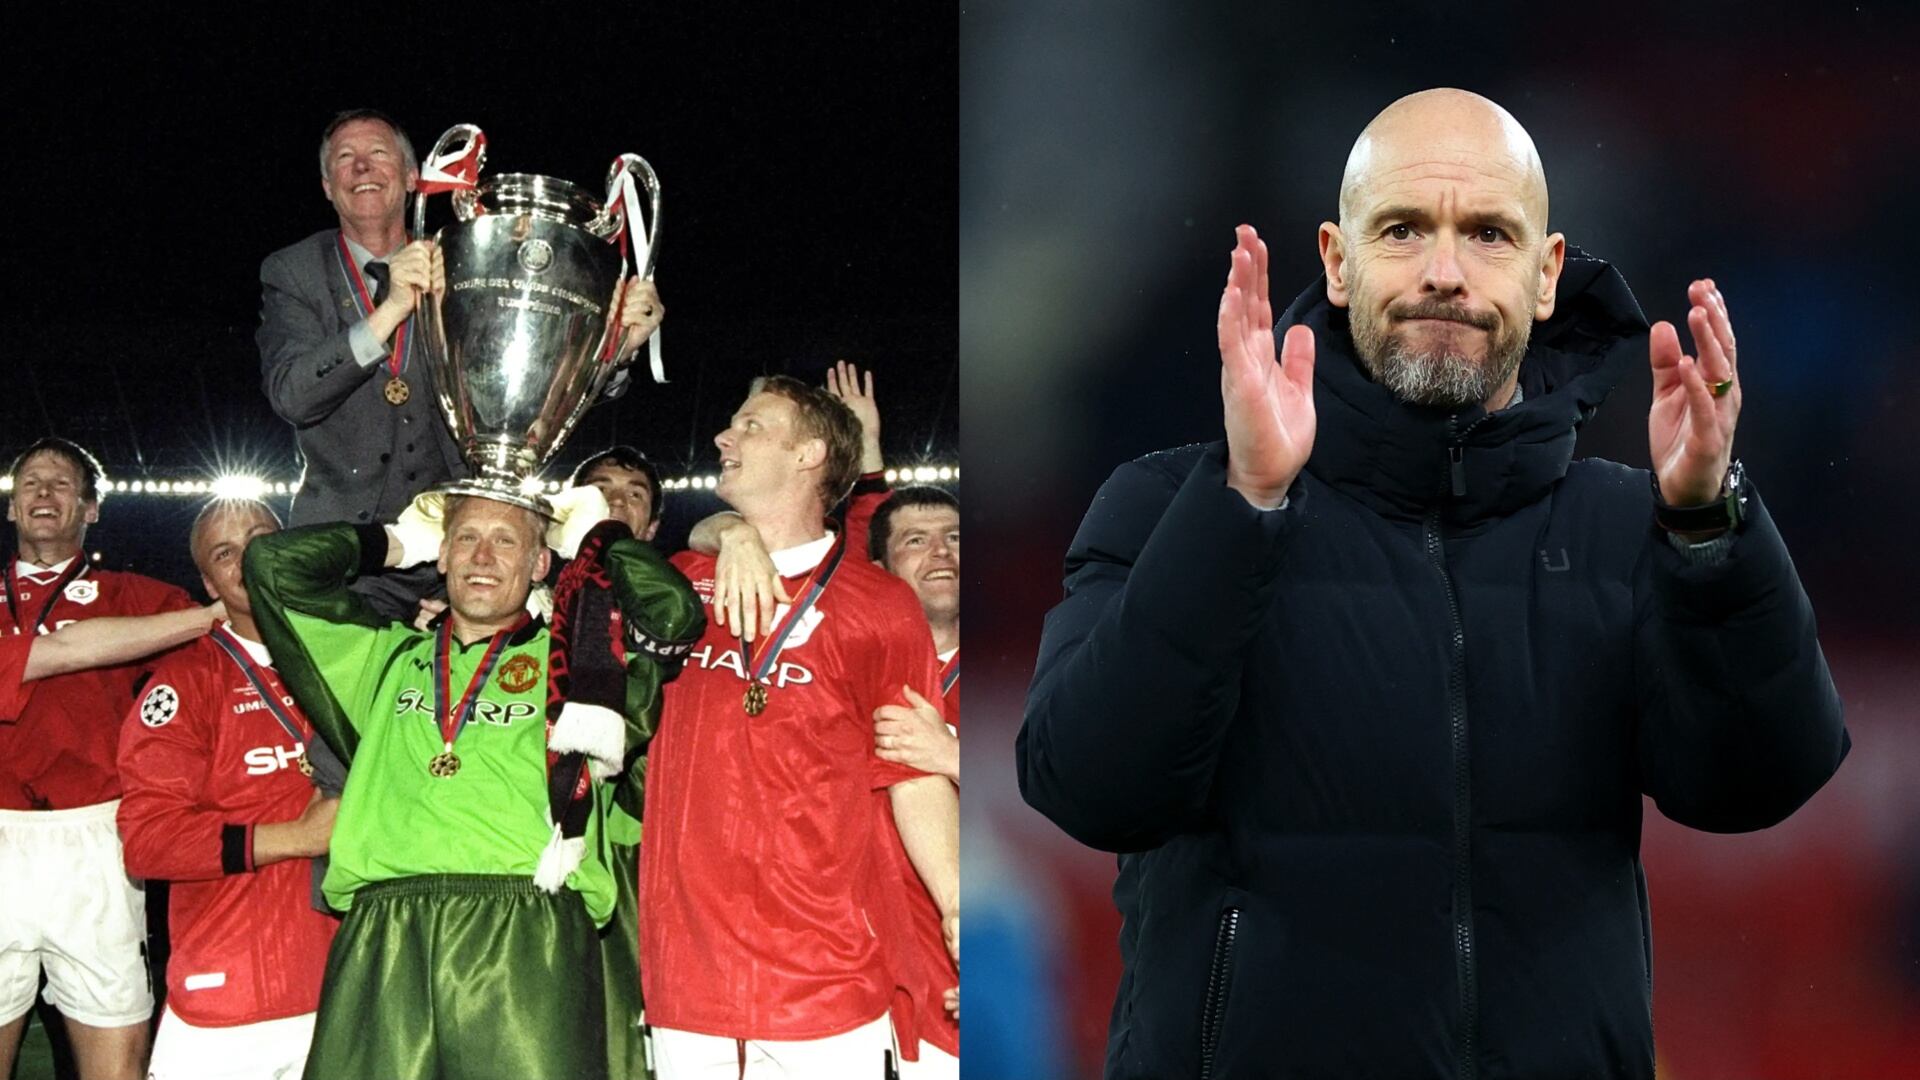 He was sacked by Manchester United, now he advices Erik Ten Hag